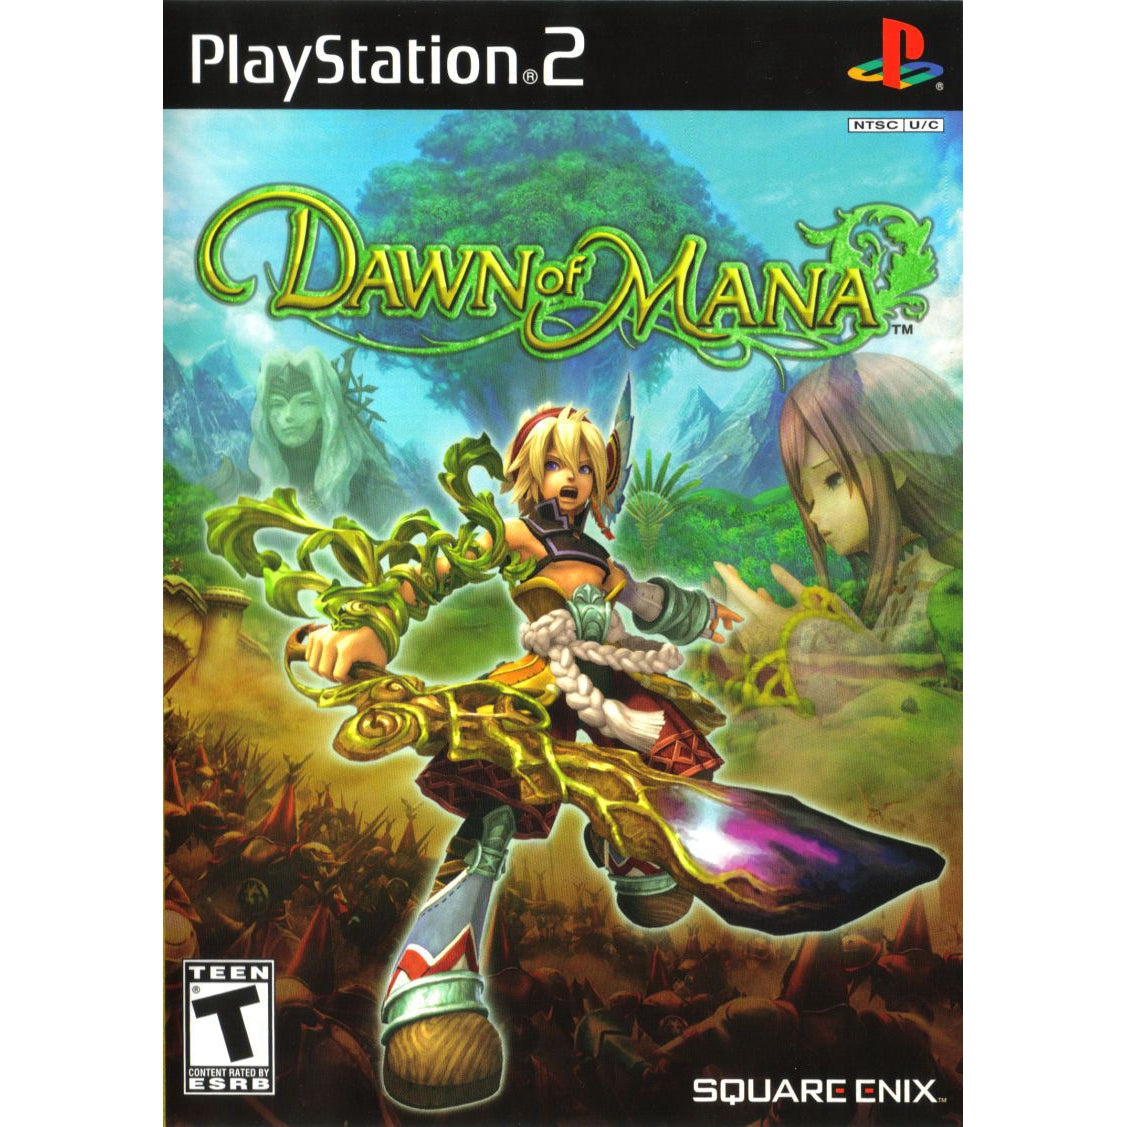 Dawn of Mana - PlayStation 2 (PS2) Game Complete - YourGamingShop.com - Buy, Sell, Trade Video Games Online. 120 Day Warranty. Satisfaction Guaranteed.